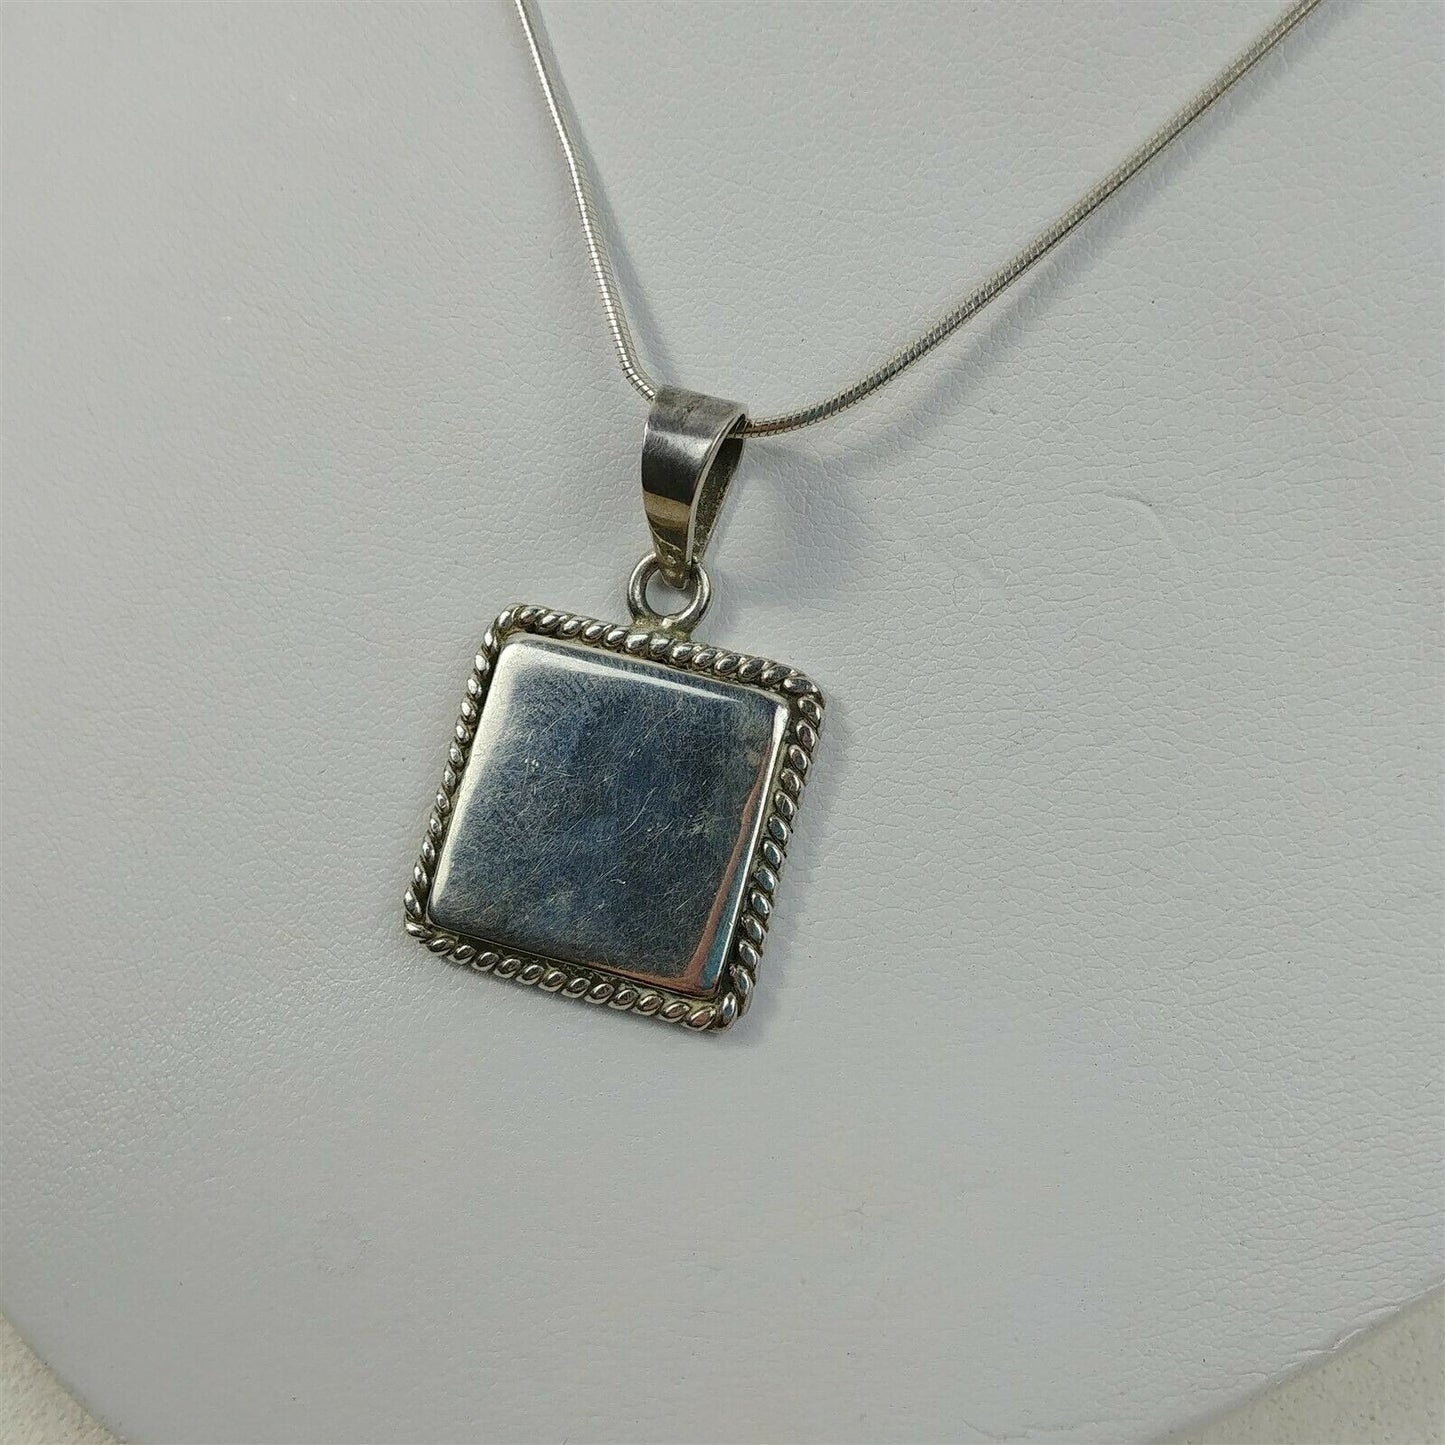 925 Italy Sterling Silver Snake Chain Necklace Square 925 Mexico Pendant 16"